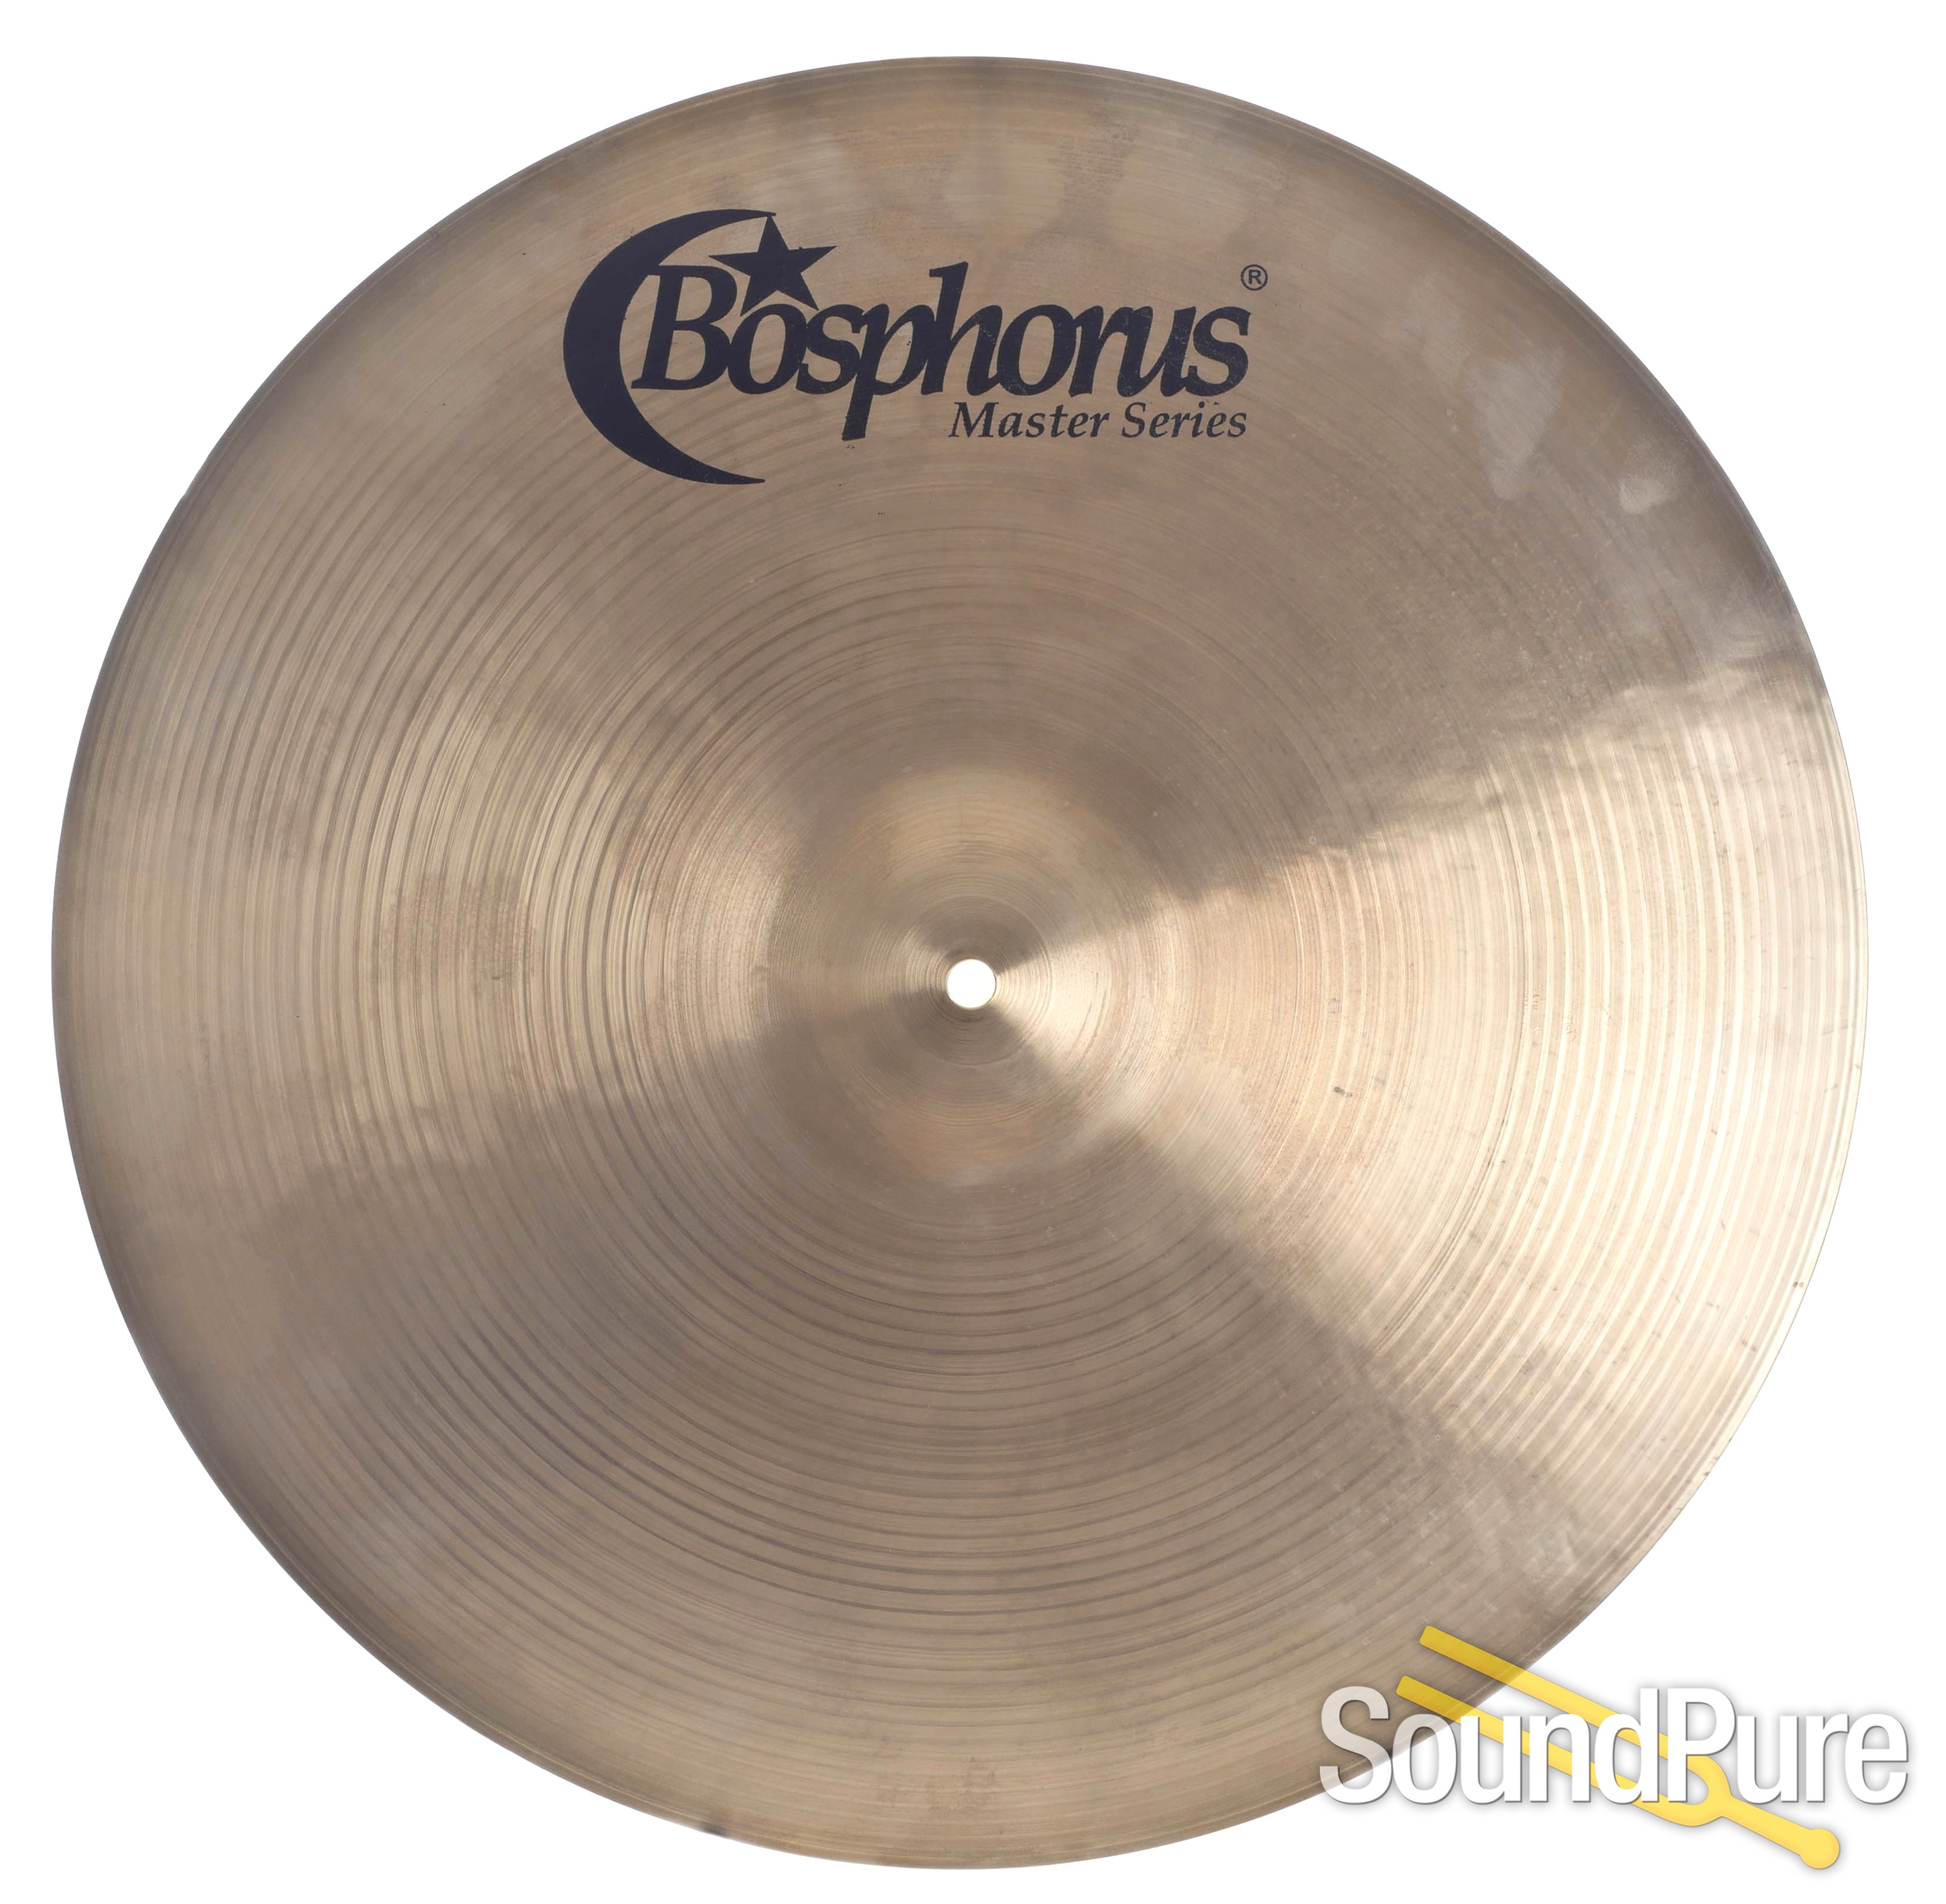 Bosphorus Cymbals G20R 20-Inch Gold Series Ride Cymbal 